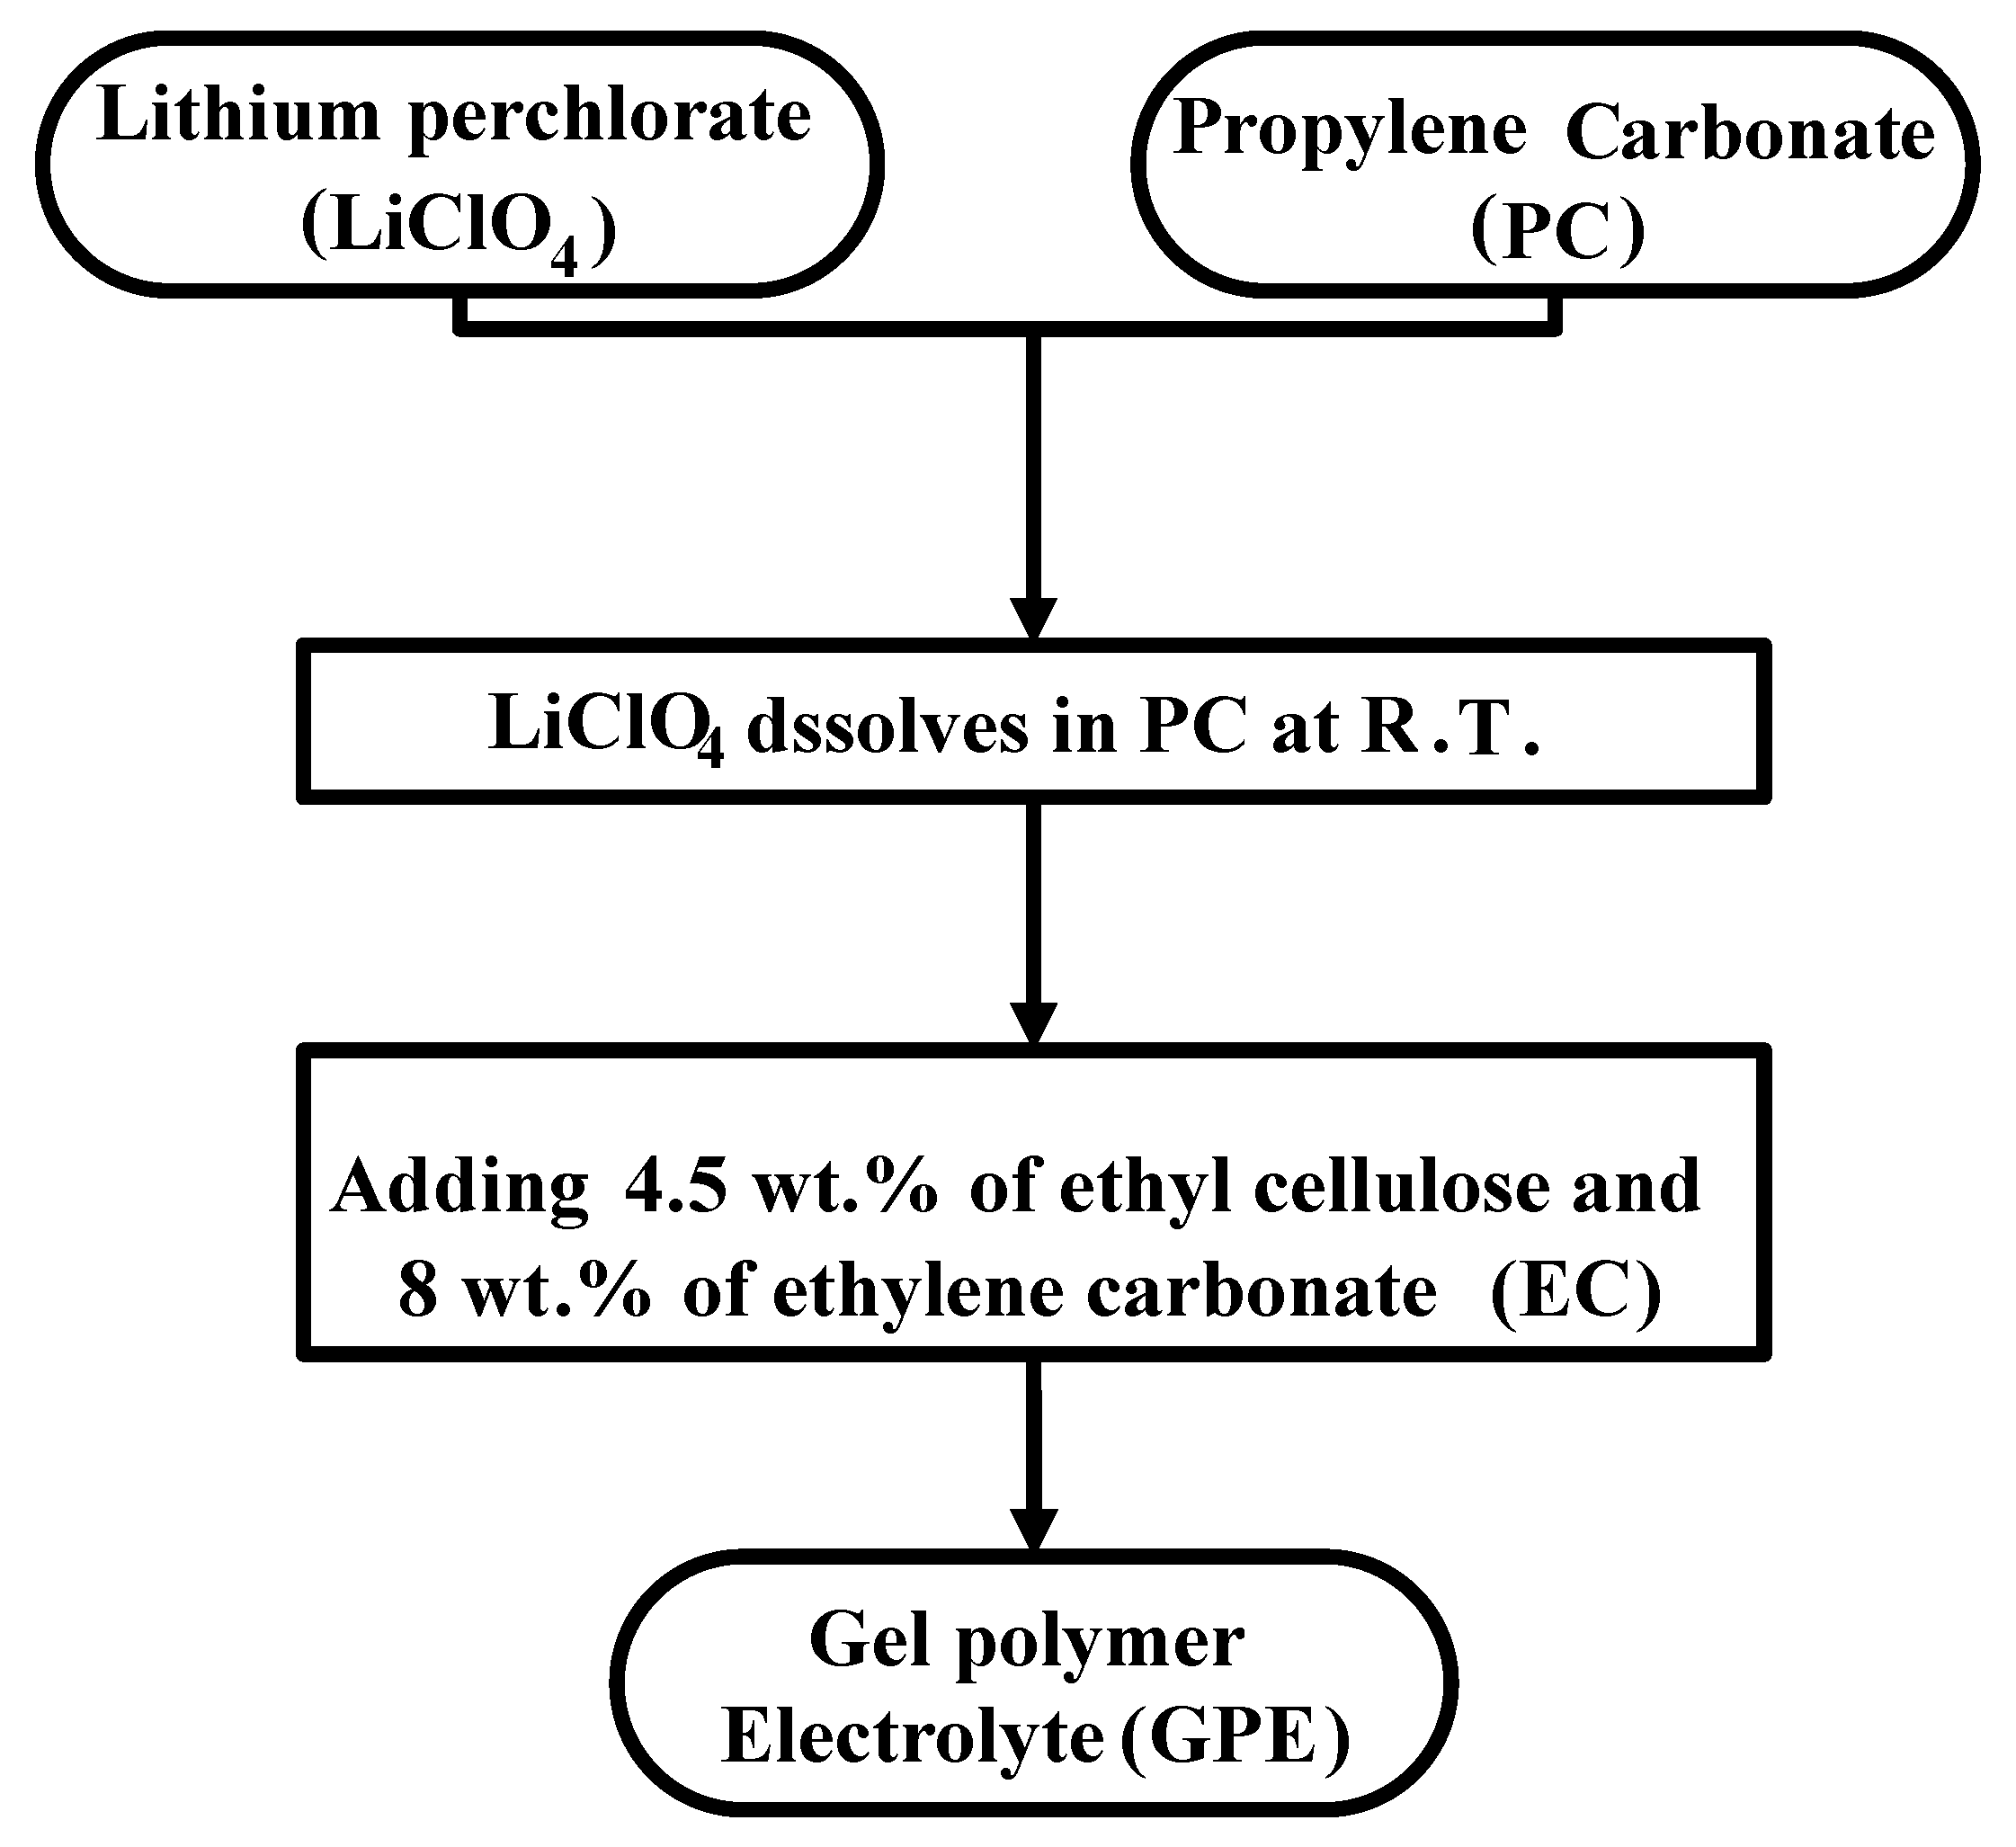 Coatings Free Full Text Electrochromic Properties Of Lithium Doped Tungsten Oxide Prepared By Electron Beam Evaporation Html